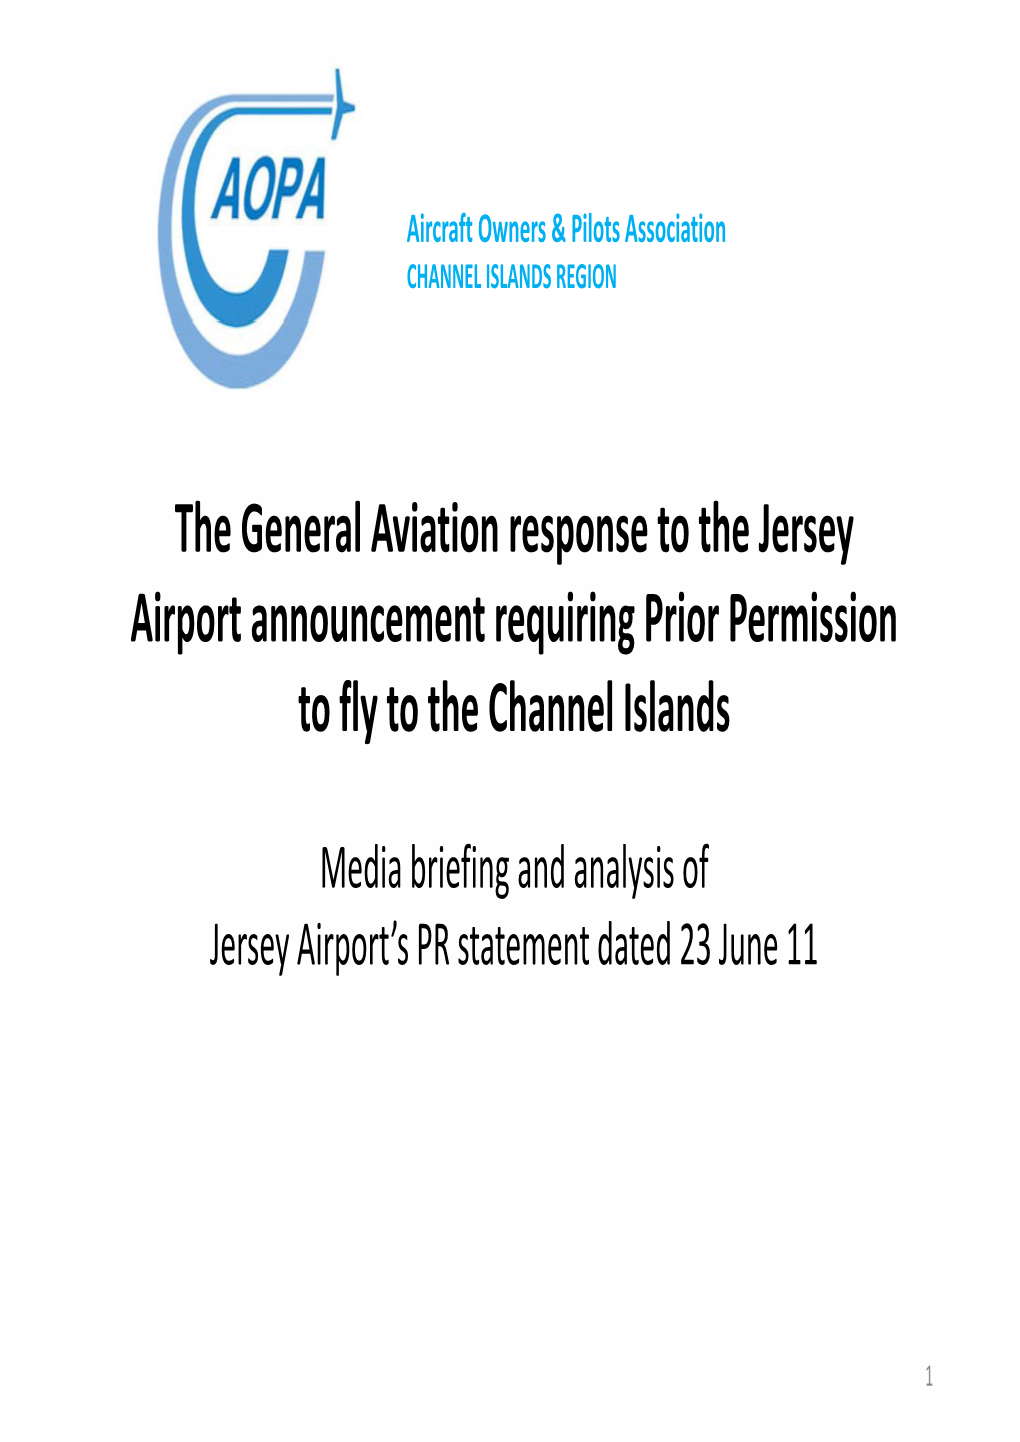 The General Aviation Response to the Jersey Airport Announcement Requiring Prior Permission to Fly to the Channel Islands